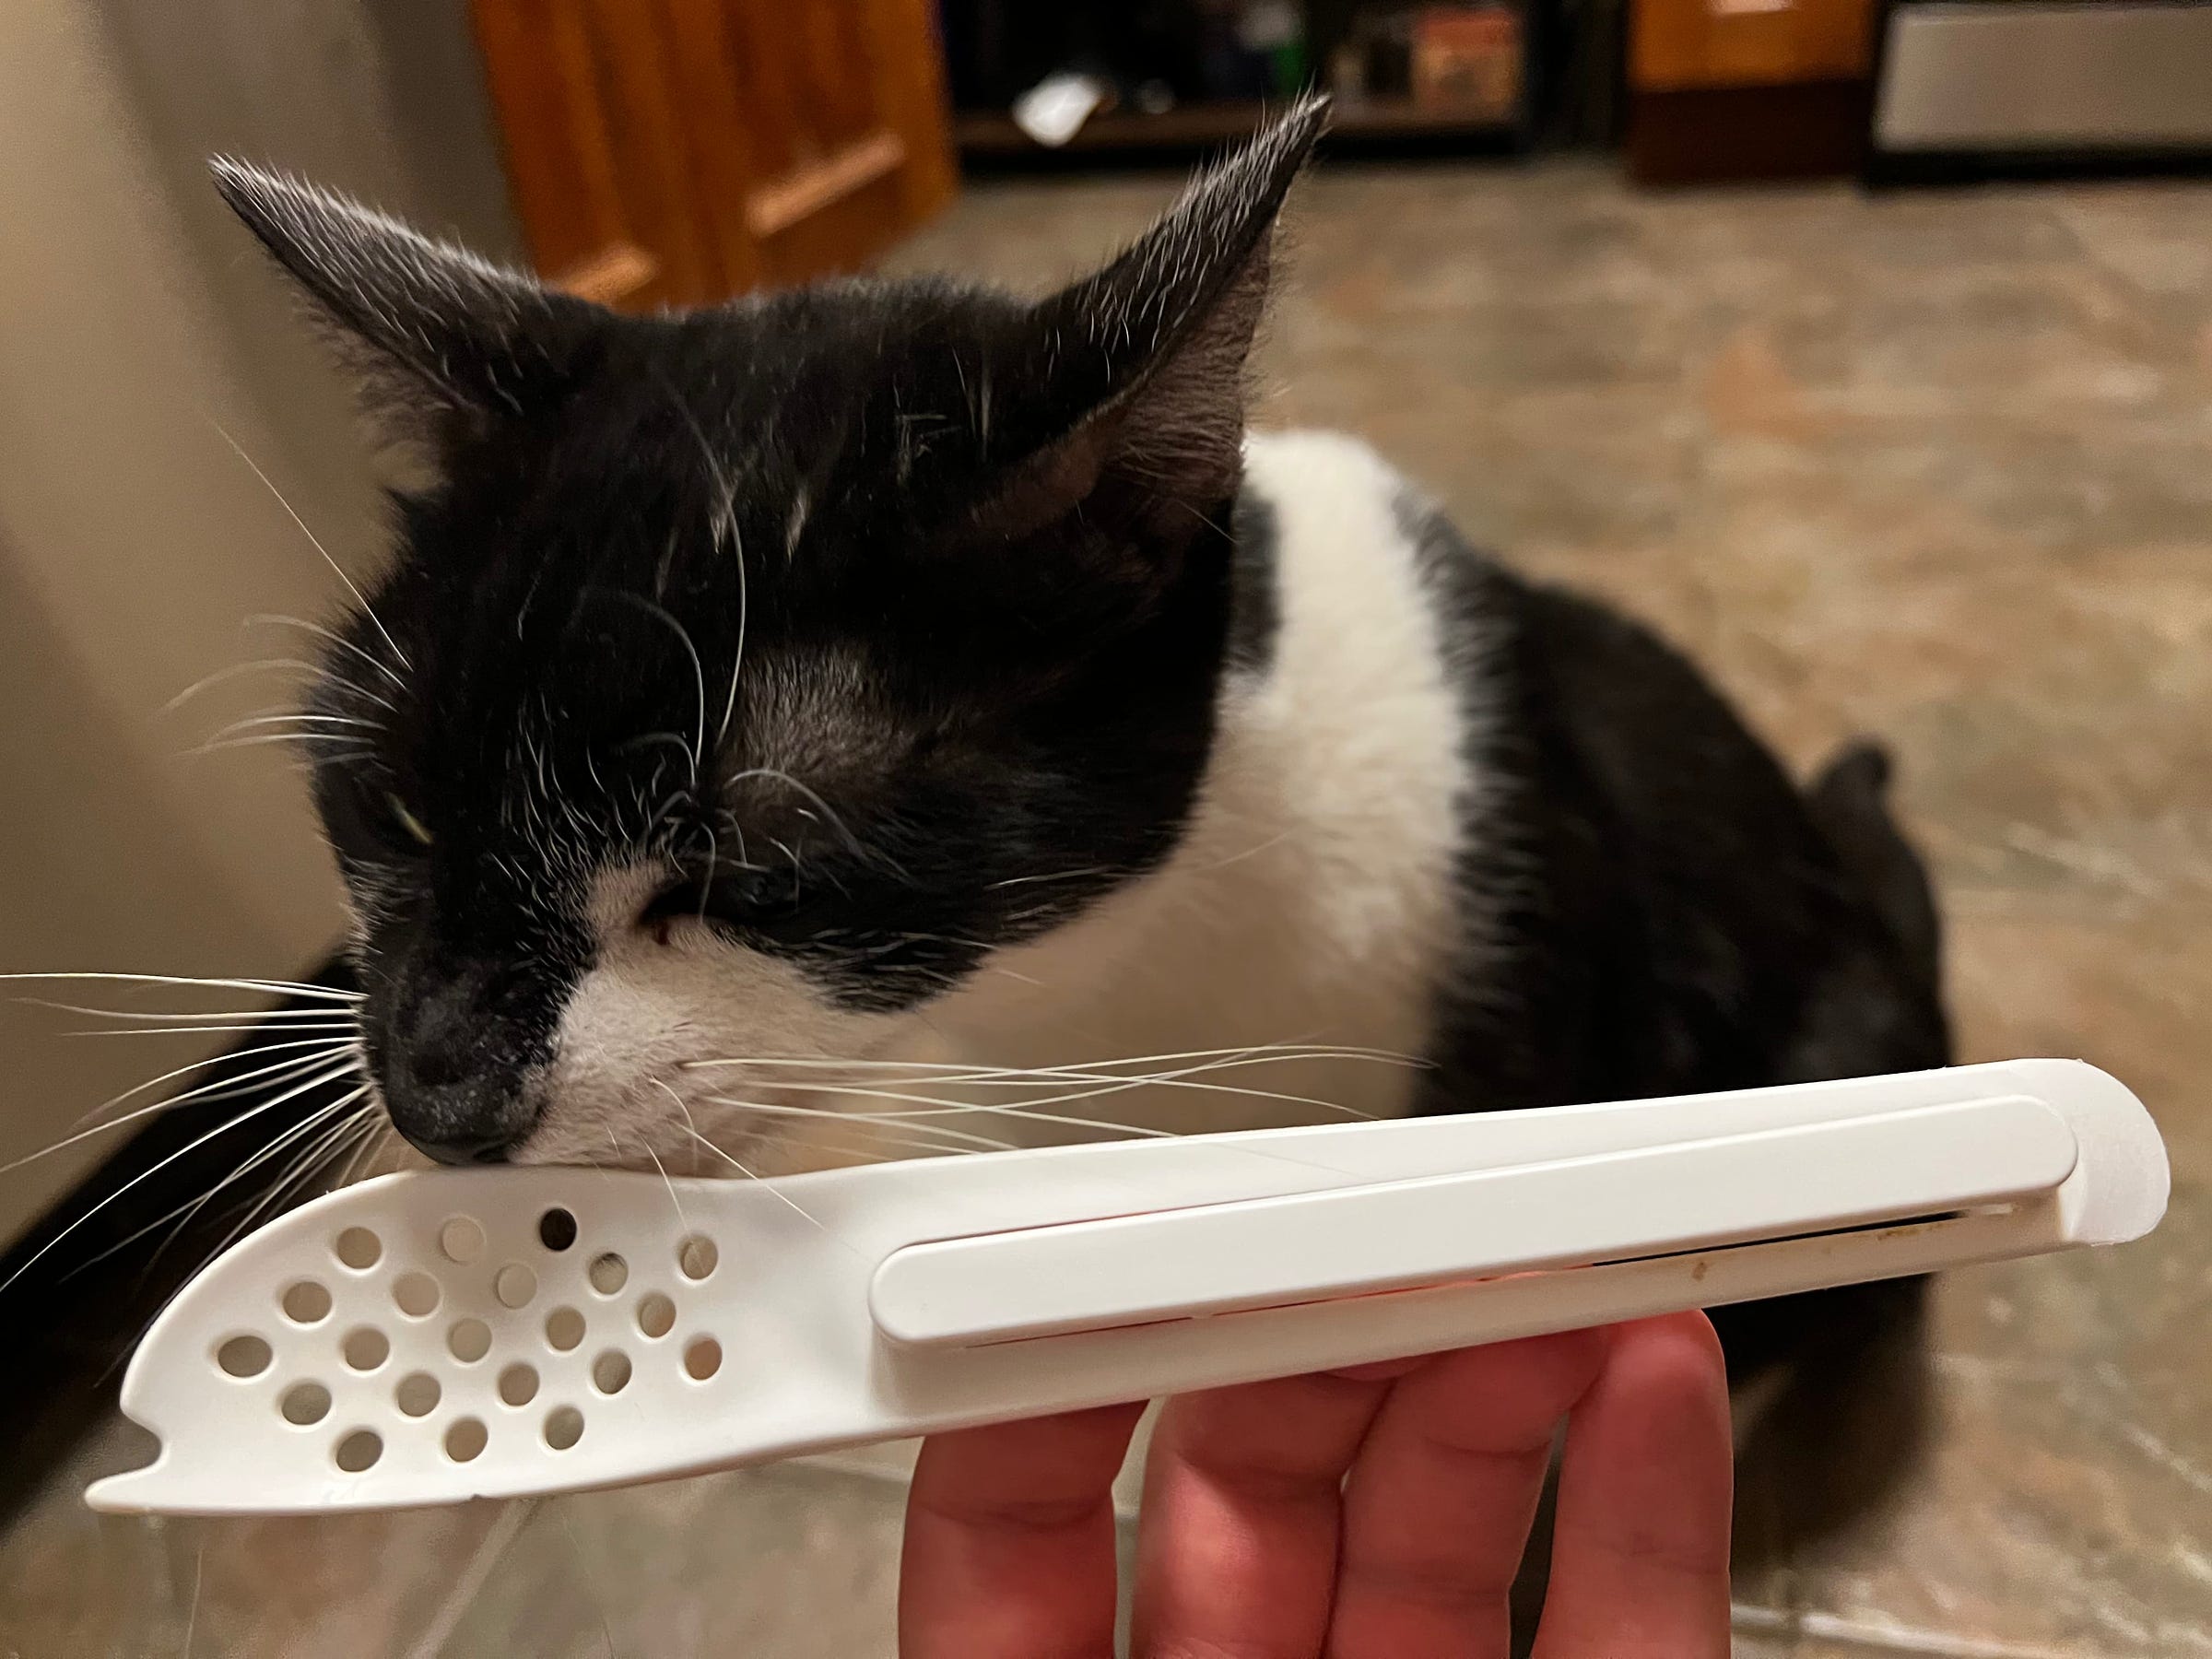 Cat sniffs a canned tuna spoon.